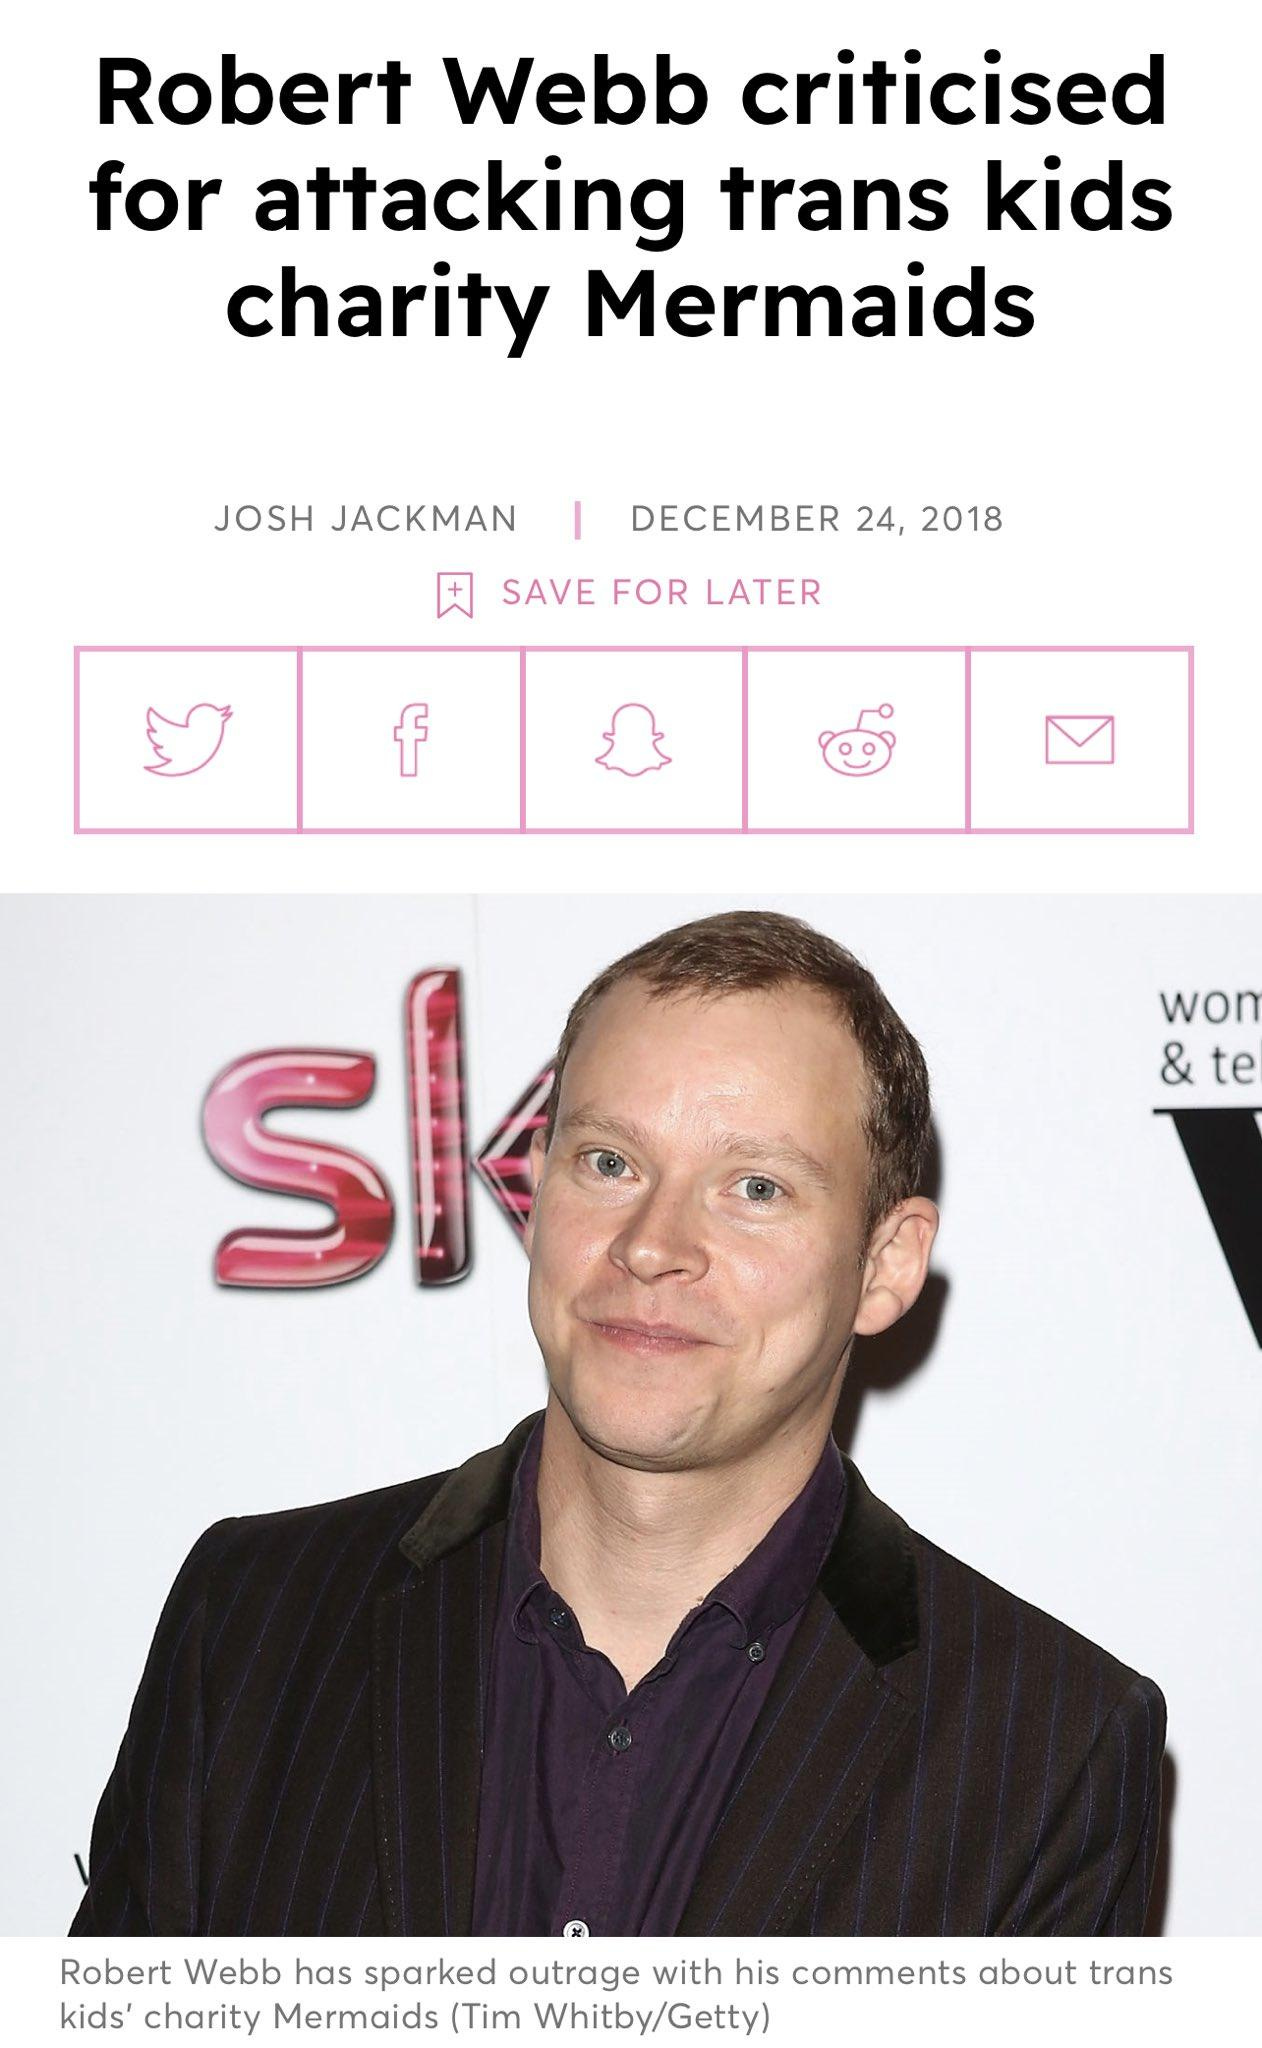 May be an image of 1 person and text that says 'Robert Webb criticised for attacking trans kids charity Mermaids JOSH JACKMAN DECEMBER 24, 2018 SAVE FOR LATER won & te sI Robert Webb has sparked outrage with his comments about trans kids' charity Mermaids (Tim Whitby/Getty)'